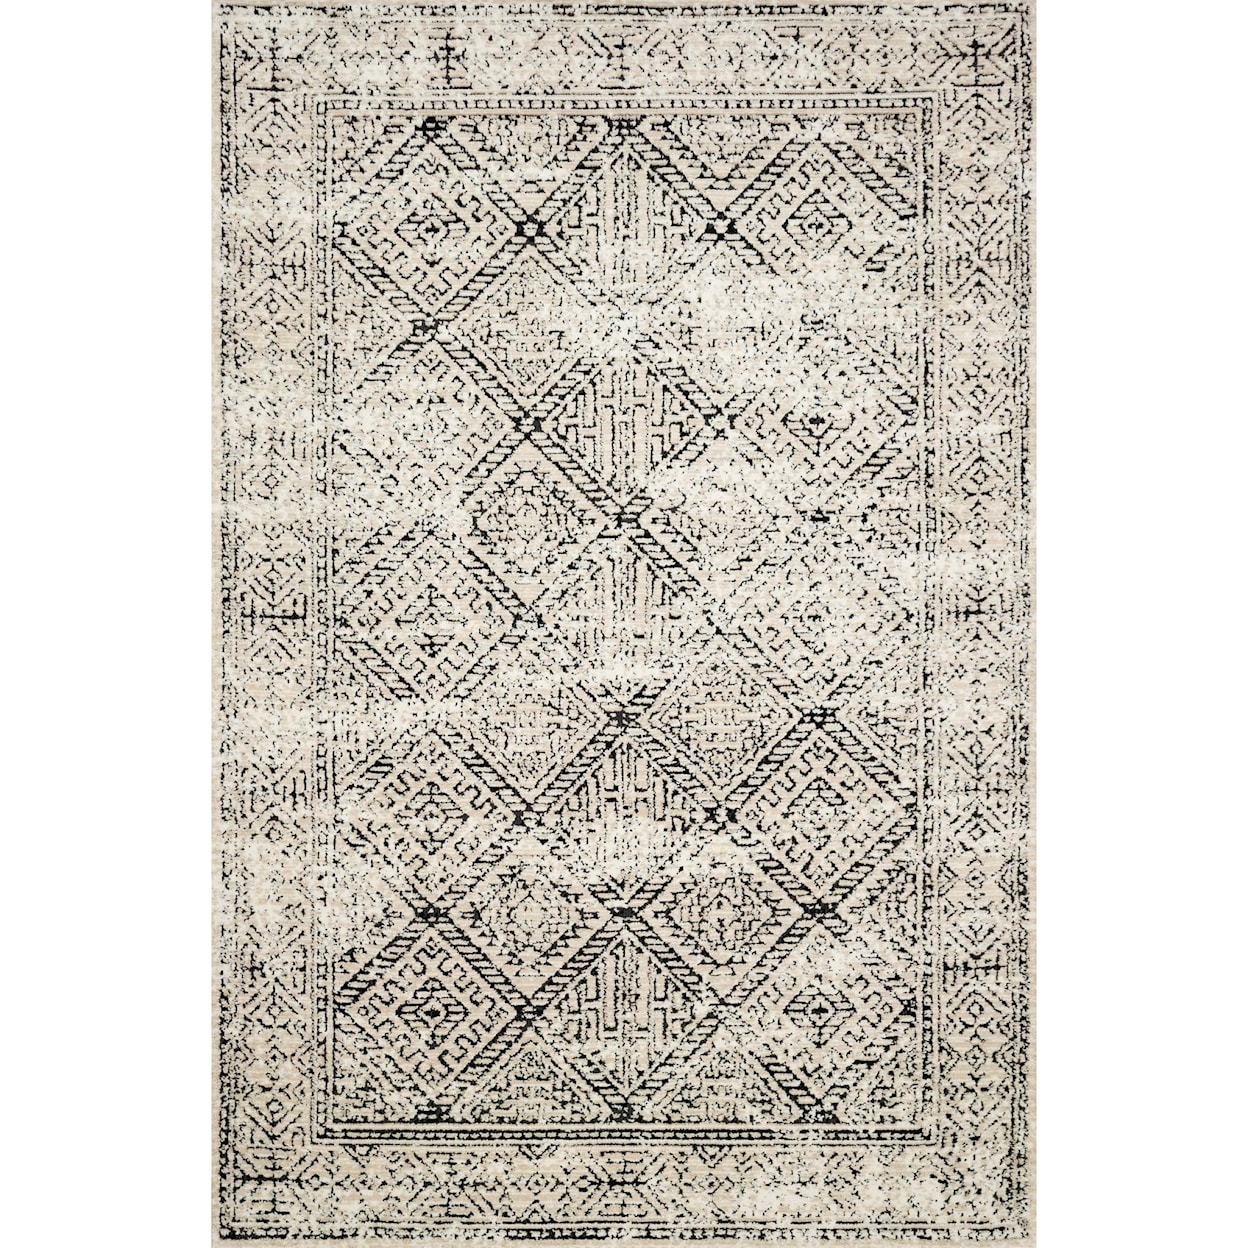 Magnolia Home by Joanna Gaines for Loloi Lotus 9'-3" x 13' Rug